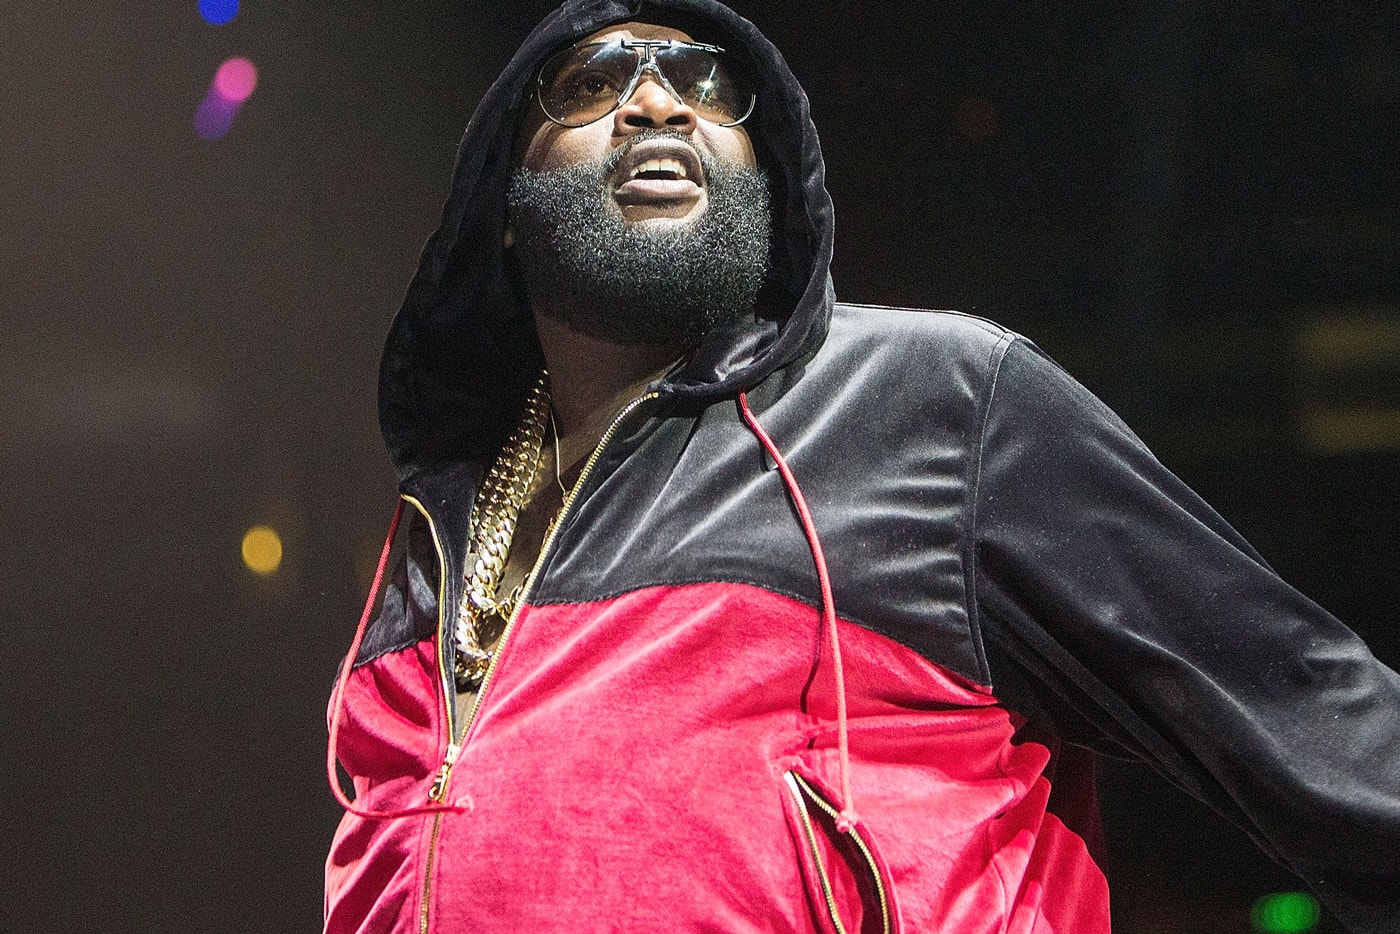 rick-ross-shares-new-video-for-peace-sign-featuring-dj-mustard